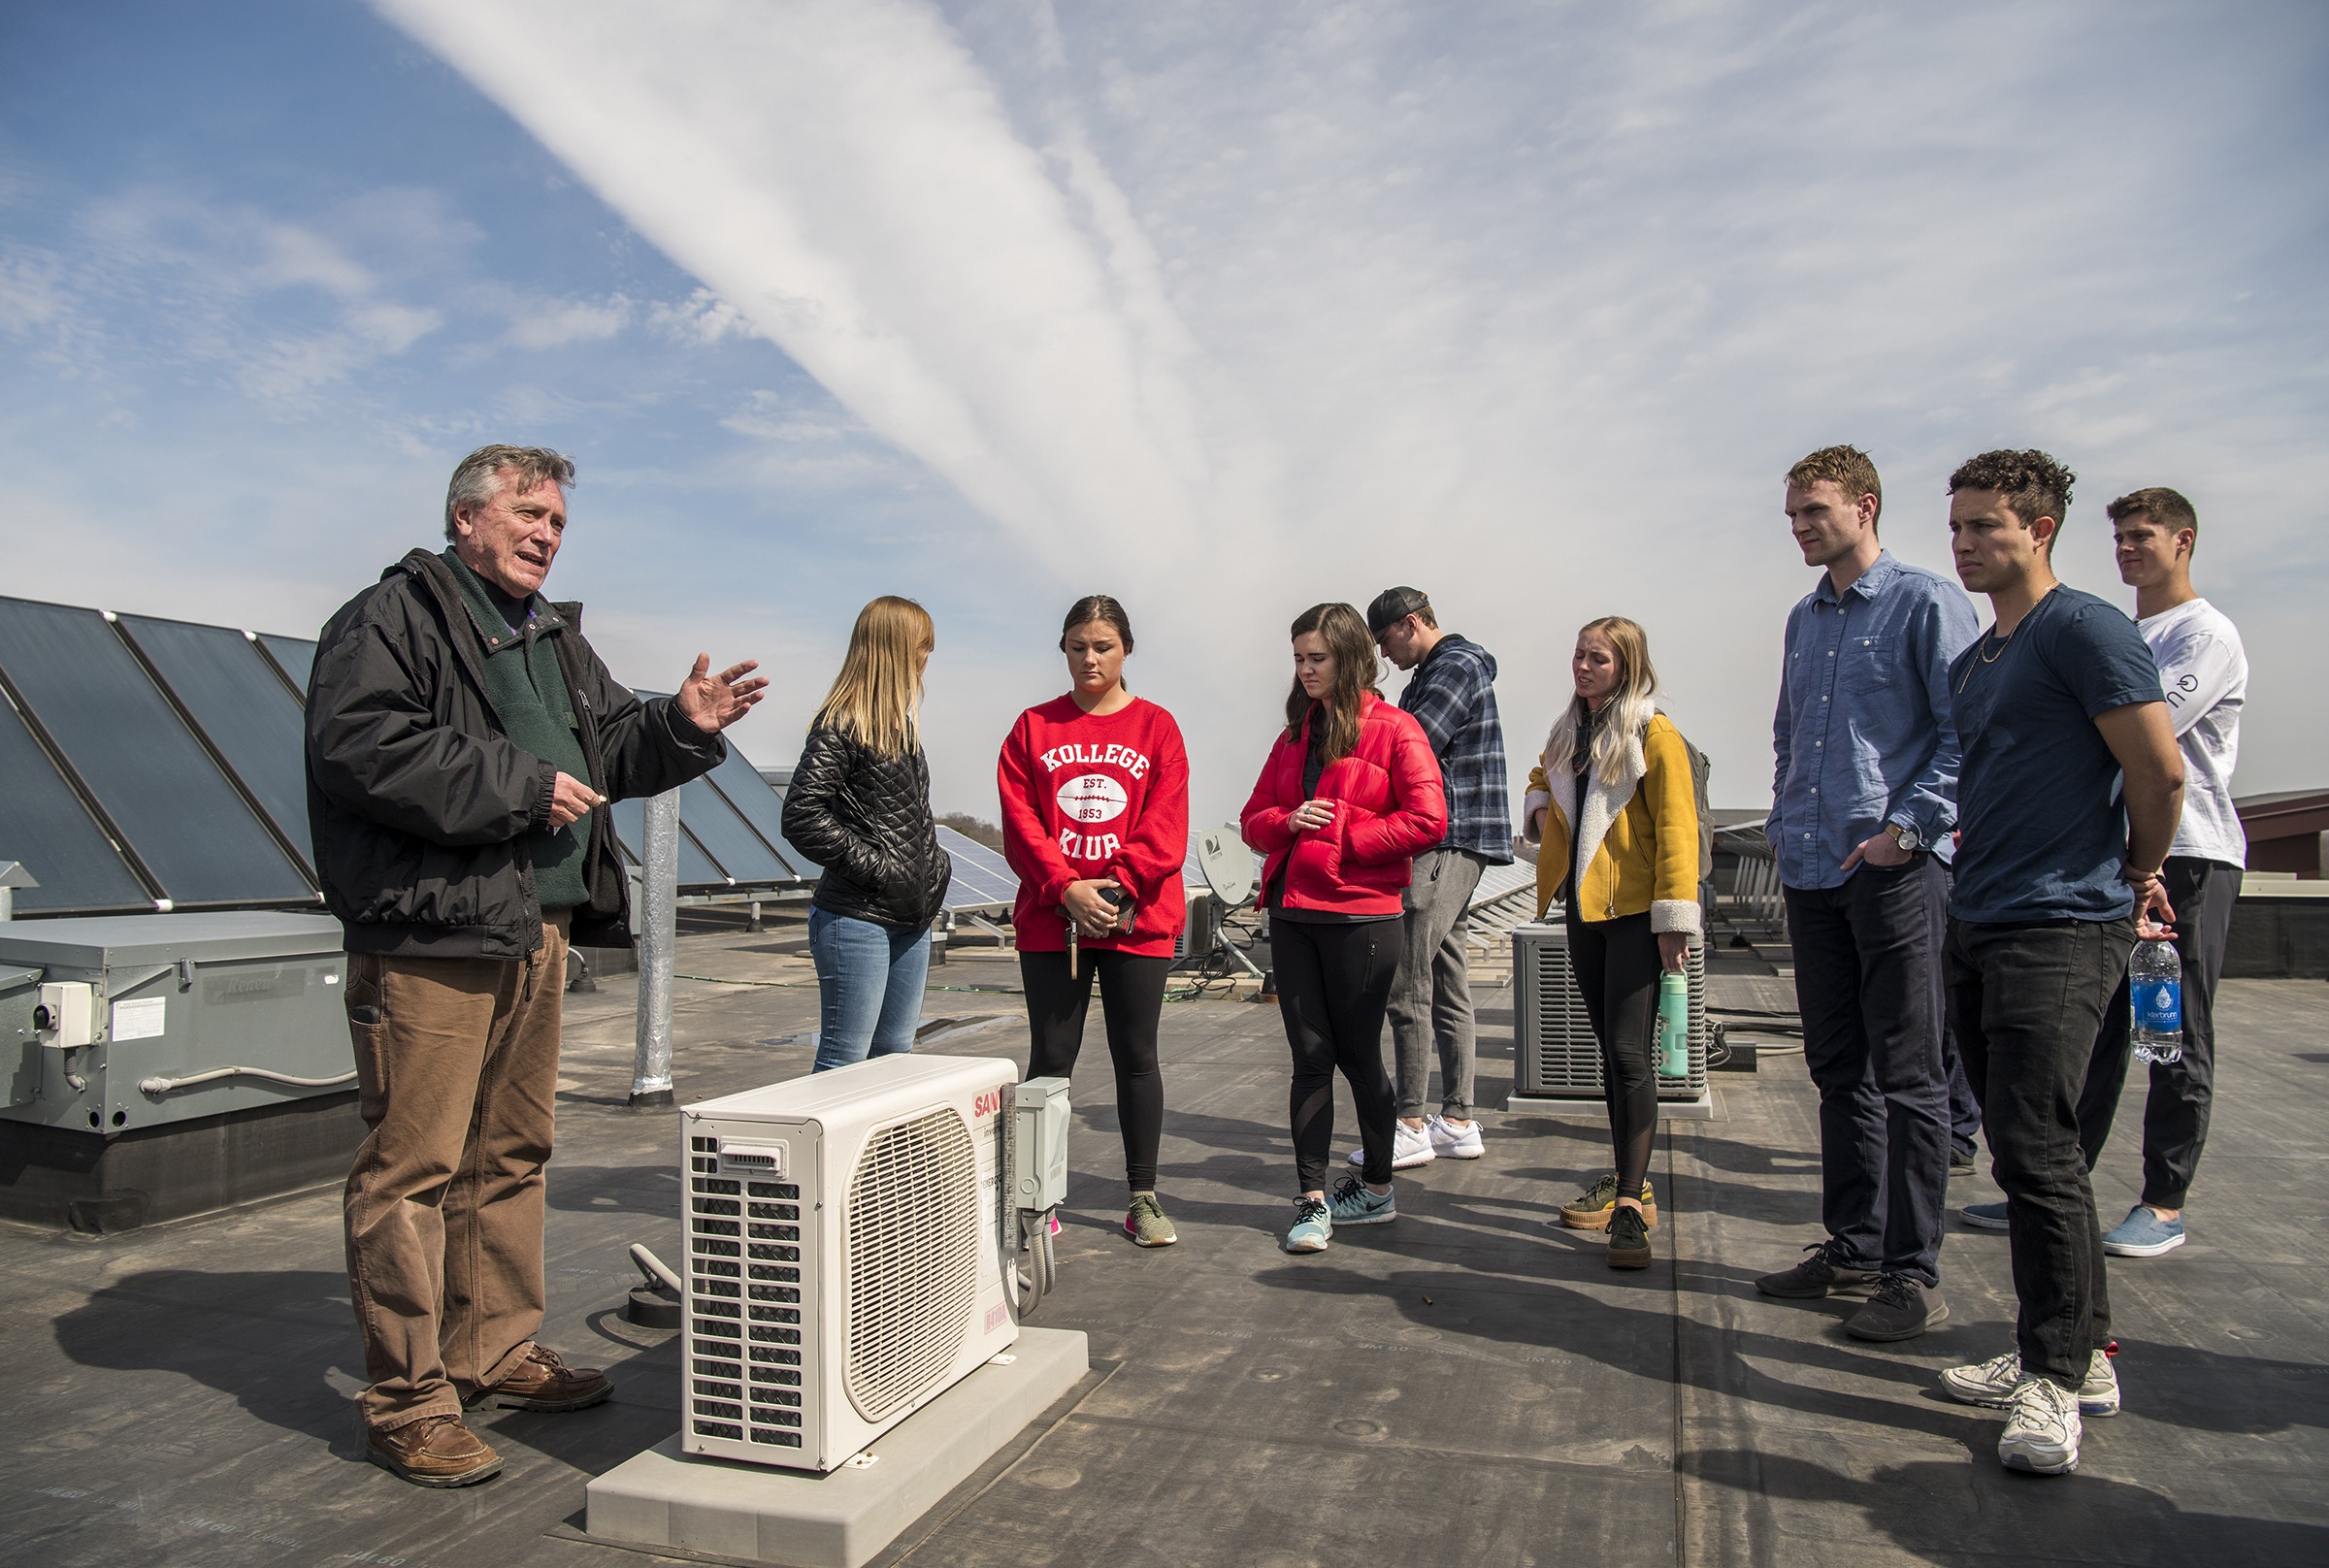 Tom Landgraf speaks to his students on a rooftop at a field trip